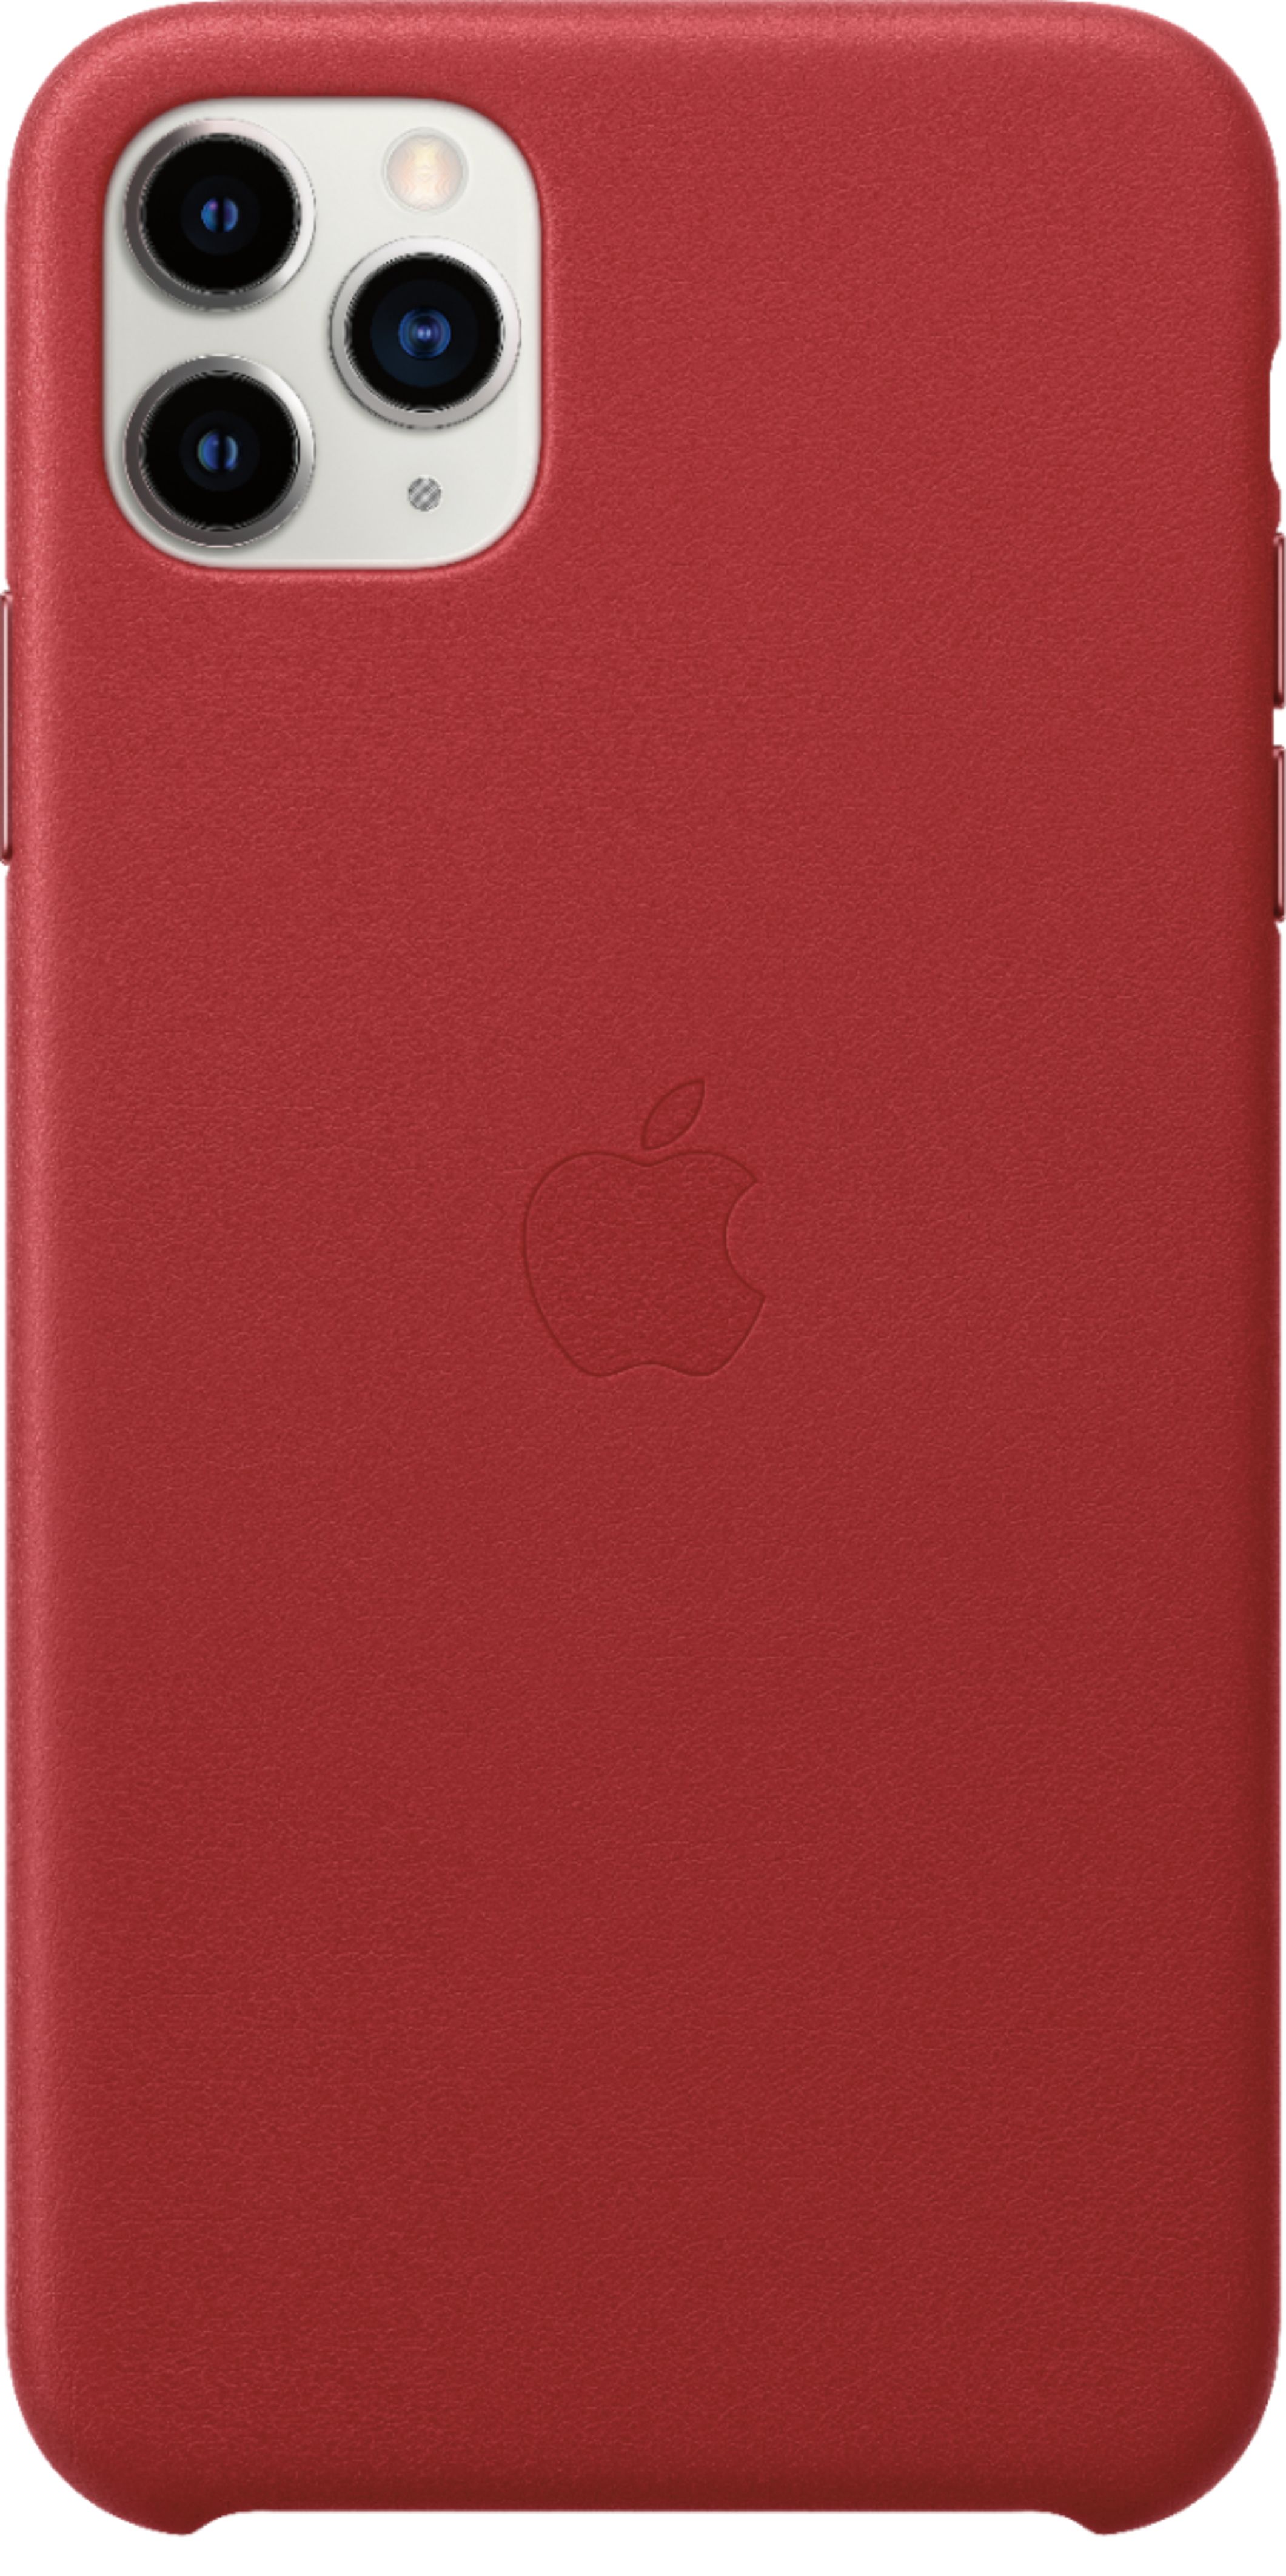 Best Buy Apple Iphone 11 Pro Max Leather Case Product Red Mx0f2zm A